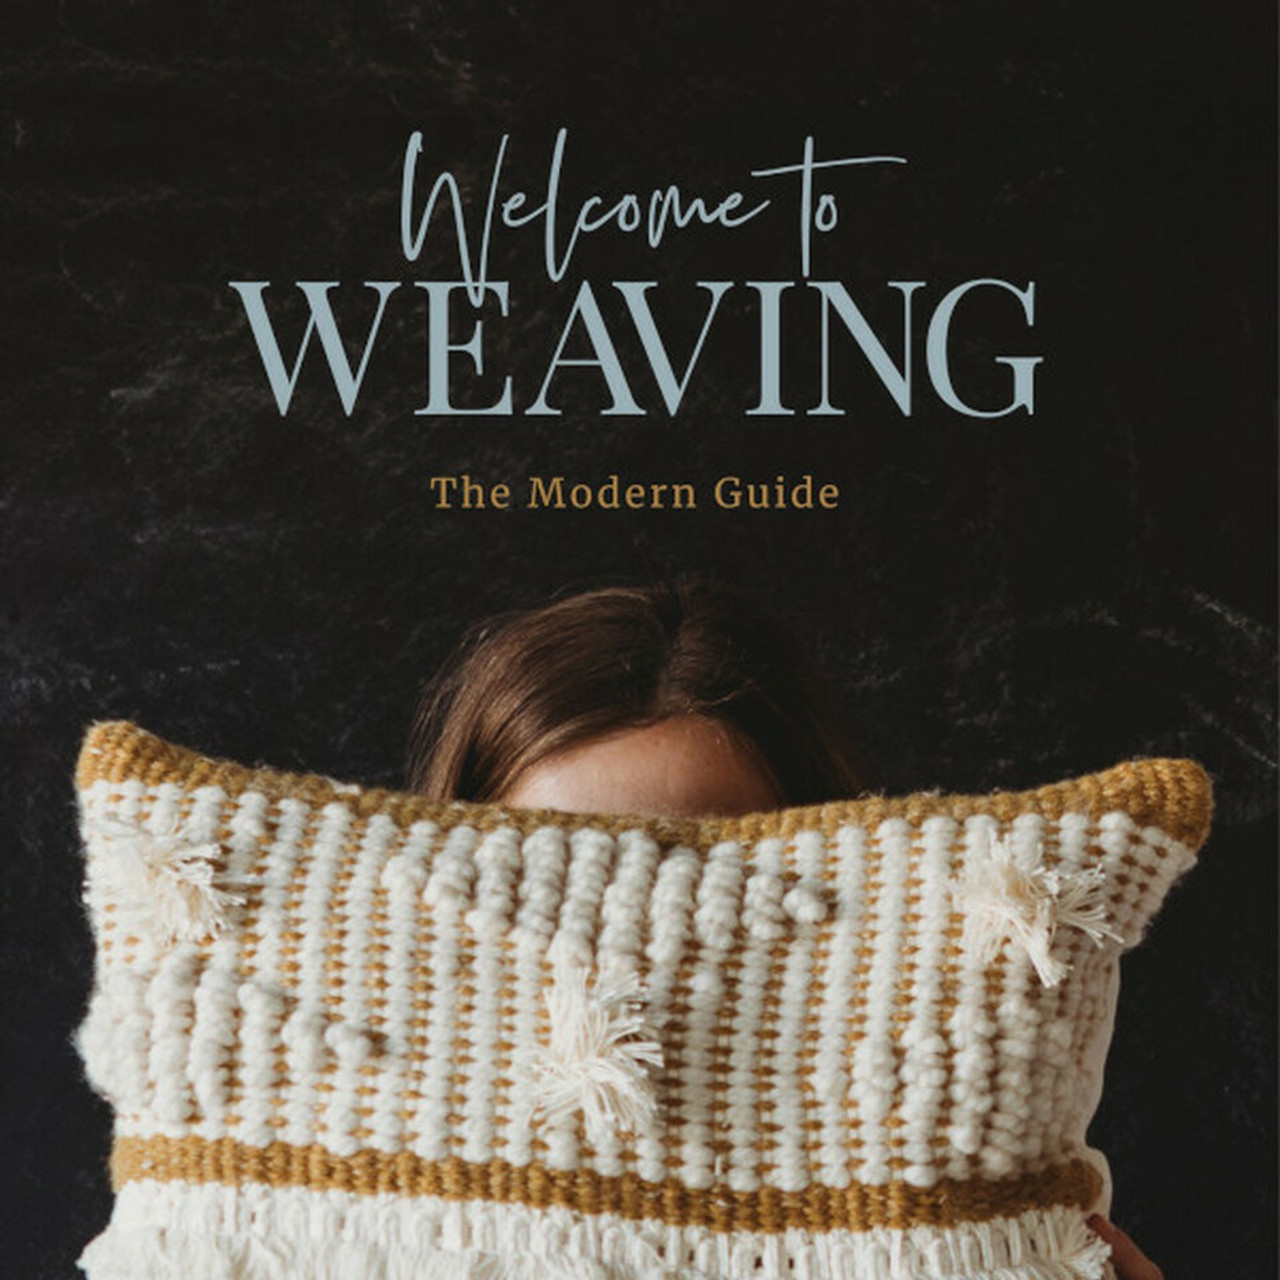 Weaving in the Ends - a field guide to needlework